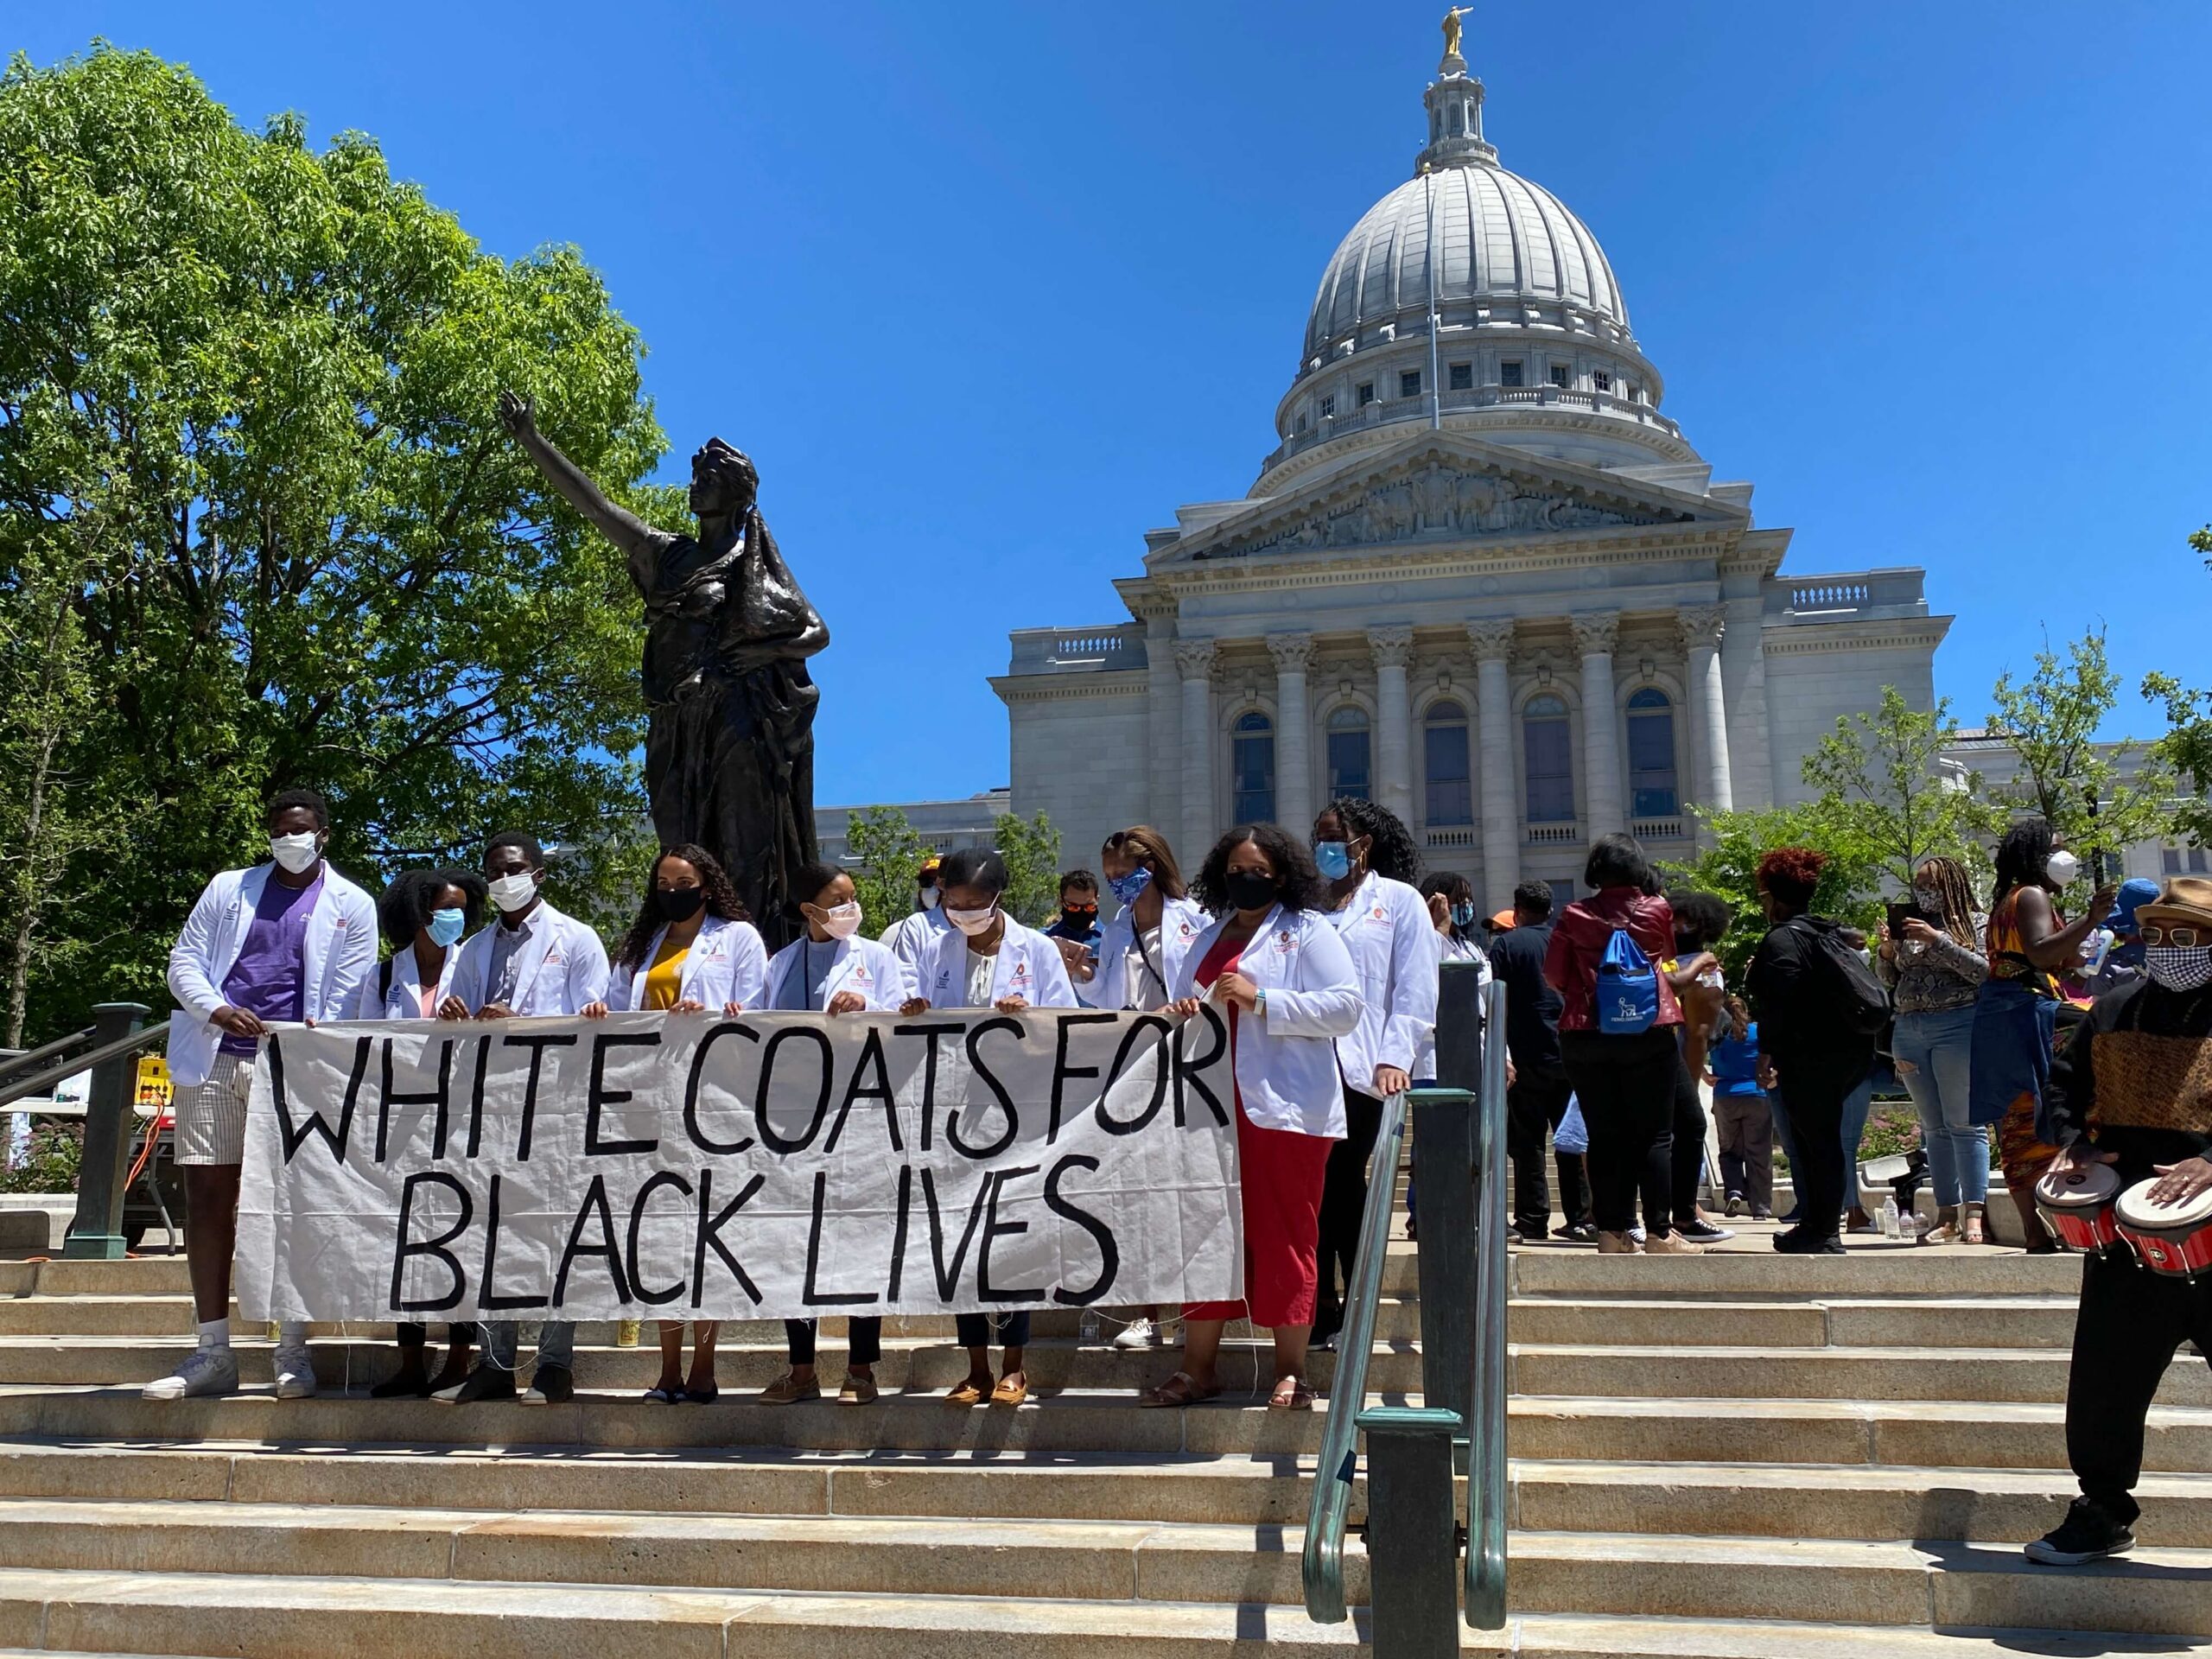 students holding up banner reading "White Coats for Black Lives" in front of capitol building